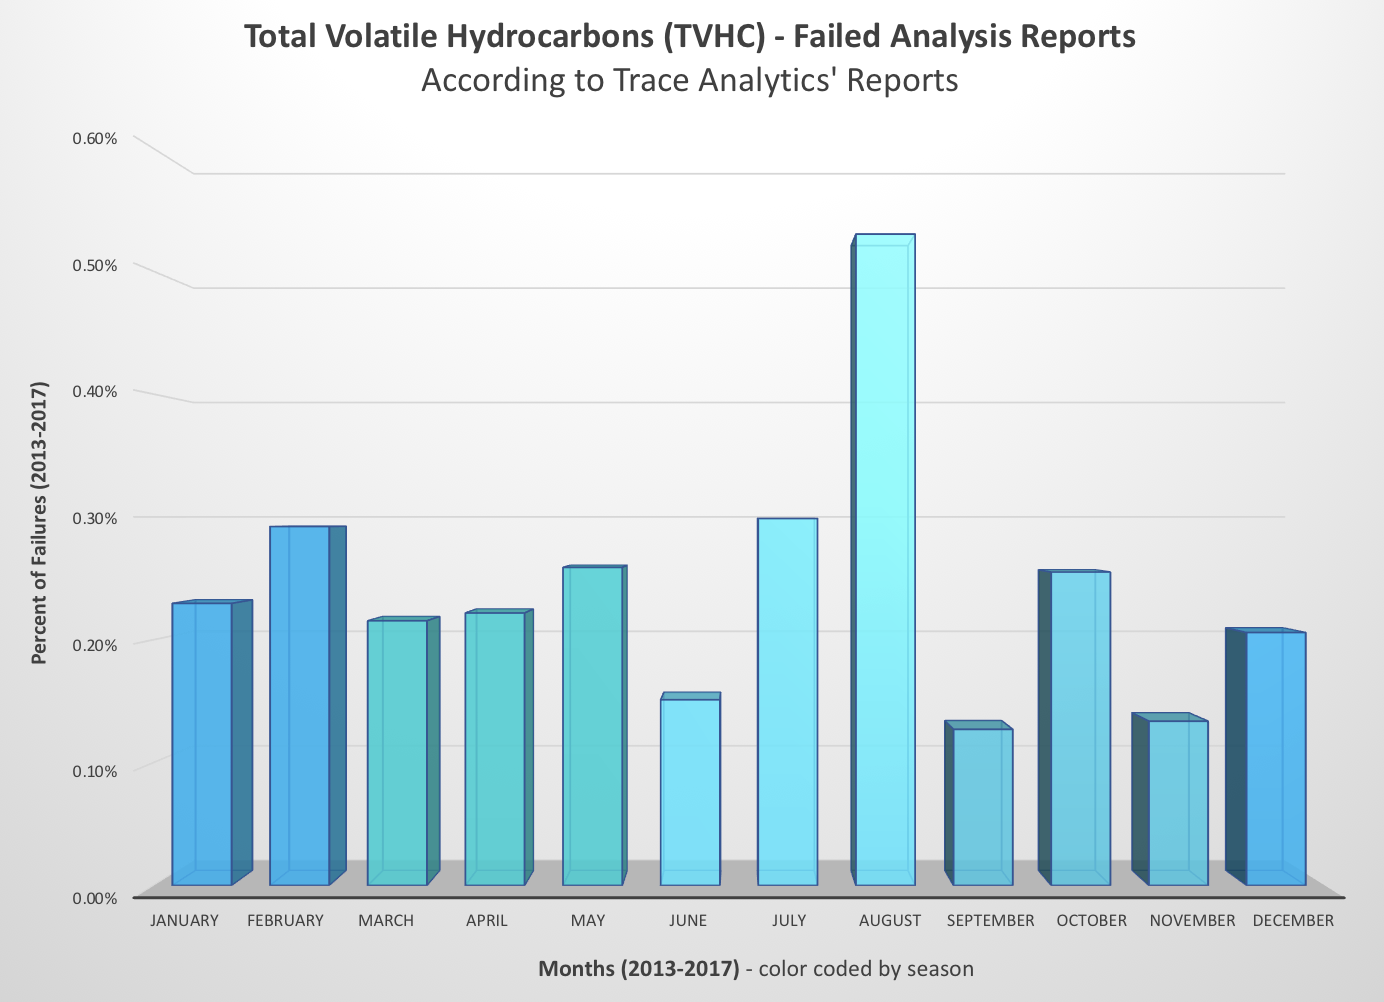 Seasonal TVHC contamination in compressed air systems